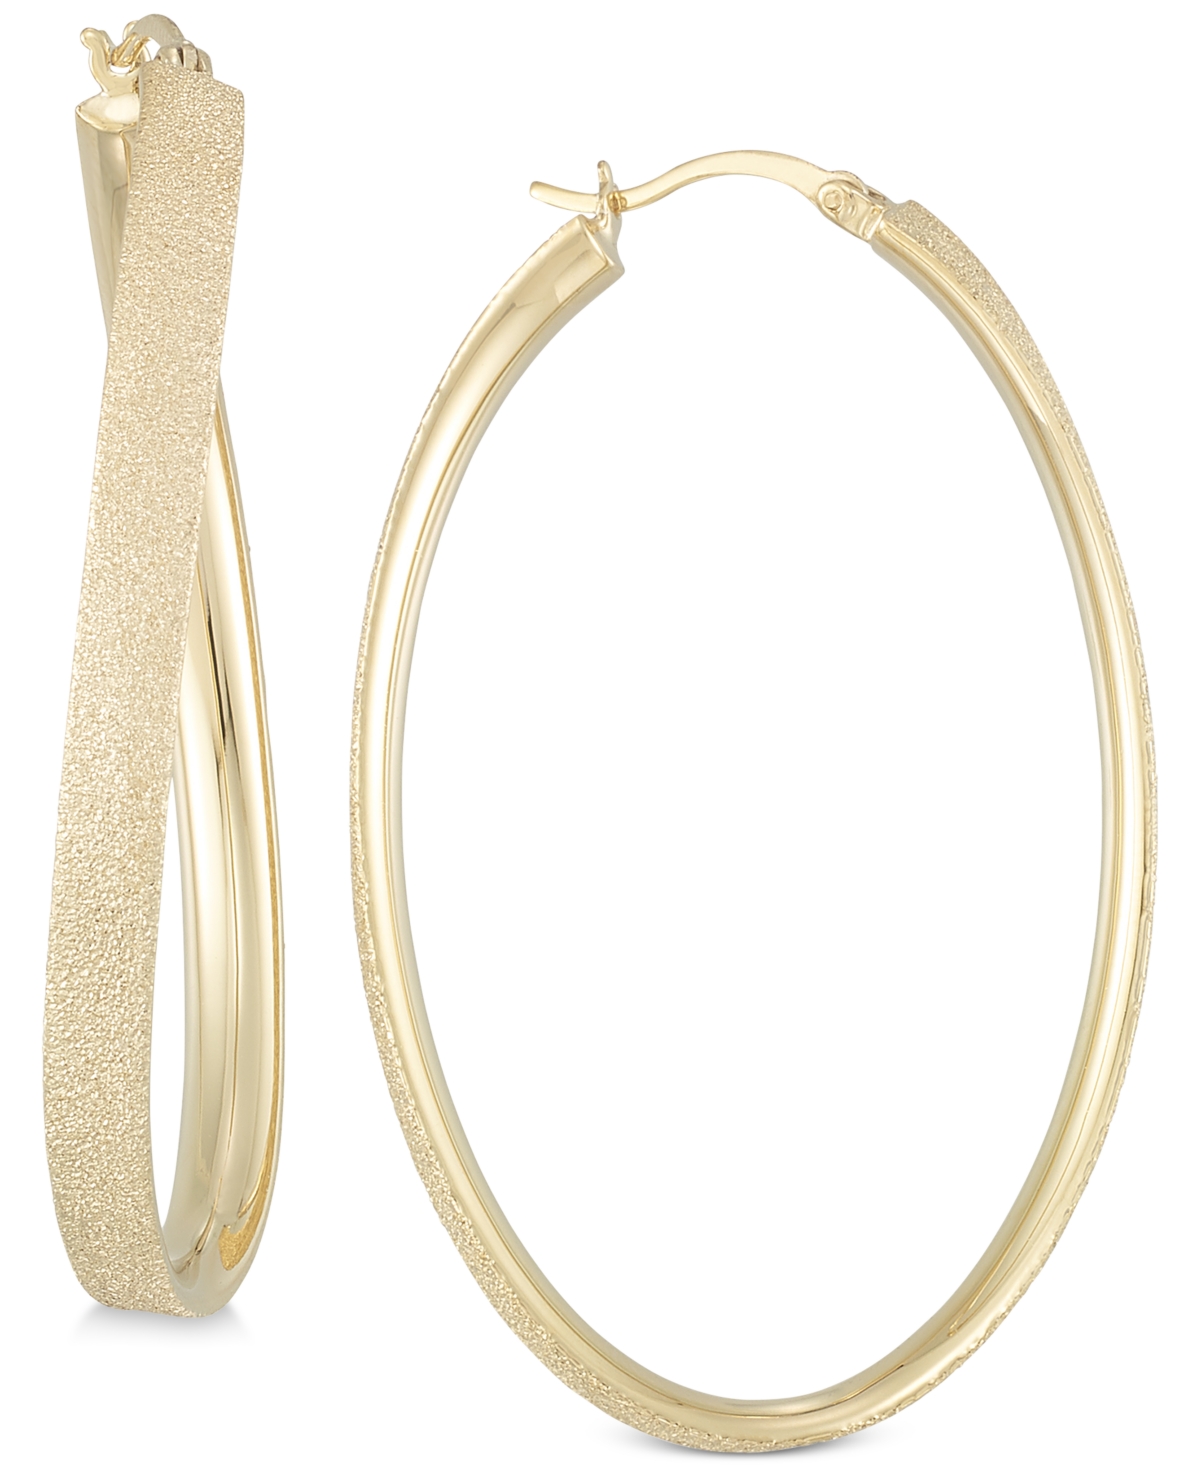 Simone I Smith Satin-Finished Hoop Earrings in 18k Gold over Sterling Silver - k Gold Over Silver